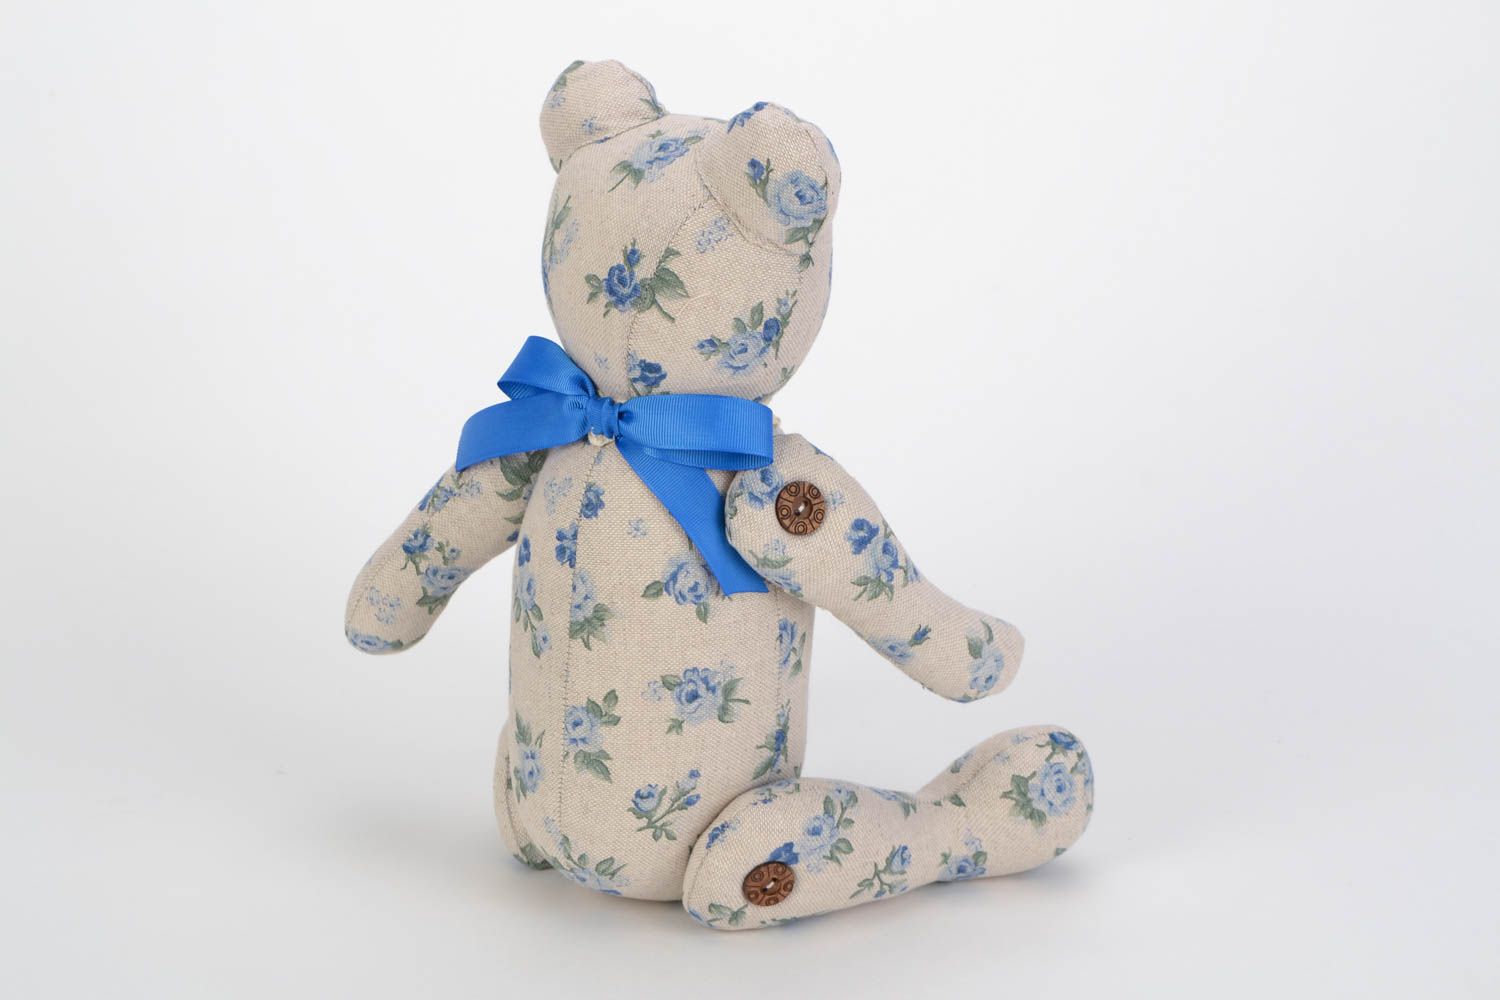 Handmade fabric soft toy bear with flower pattern for home decor photo 5